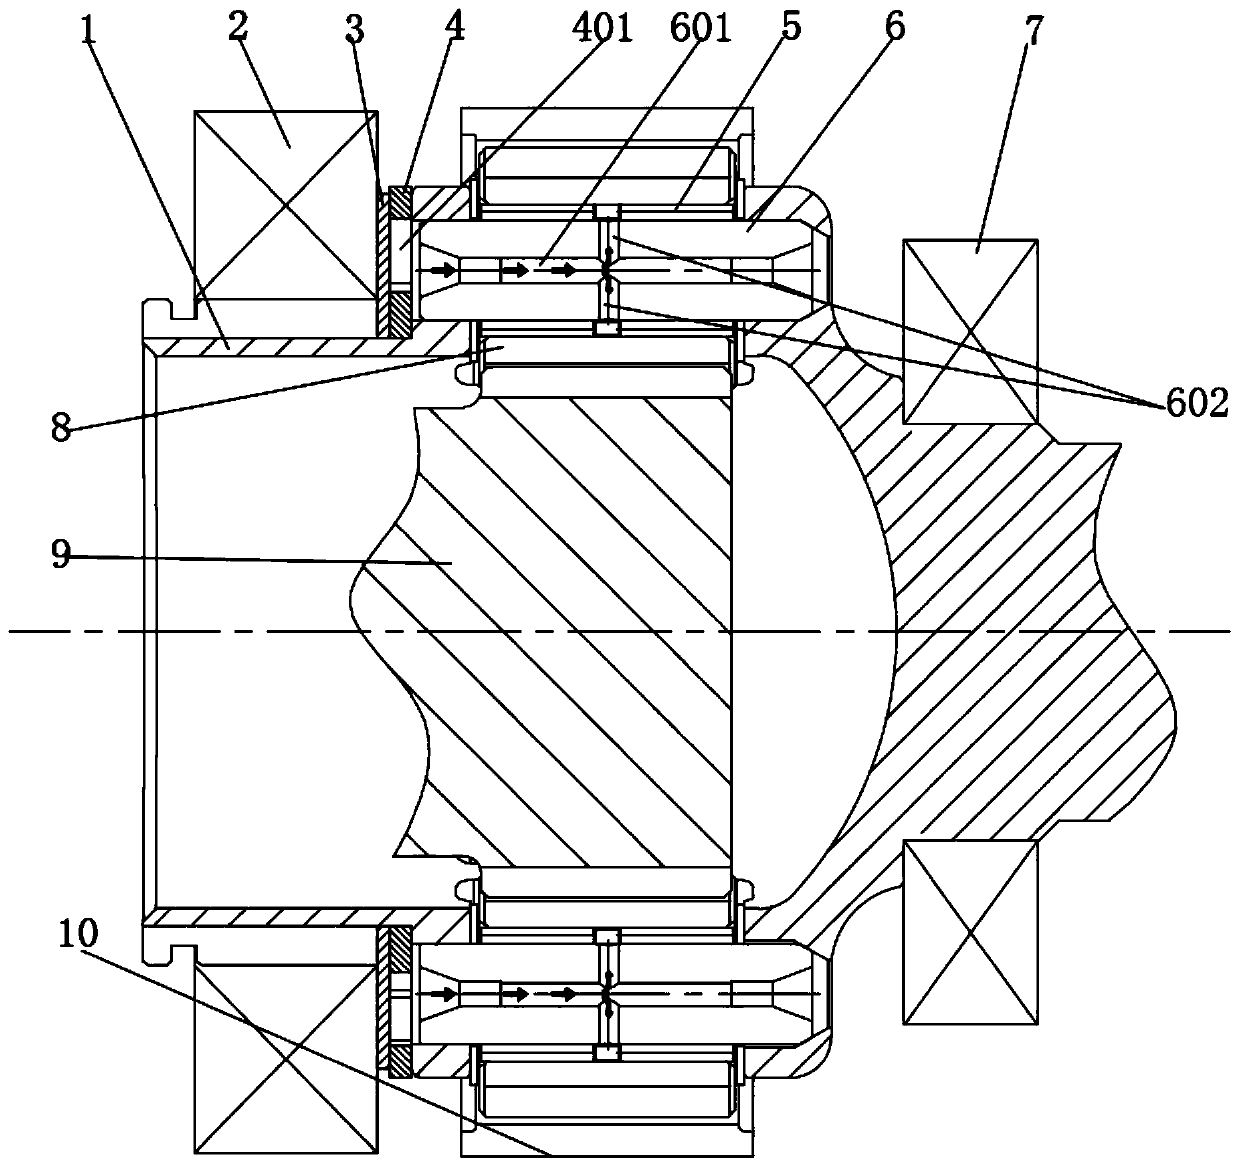 Planetary gear train bearing lubricating structure